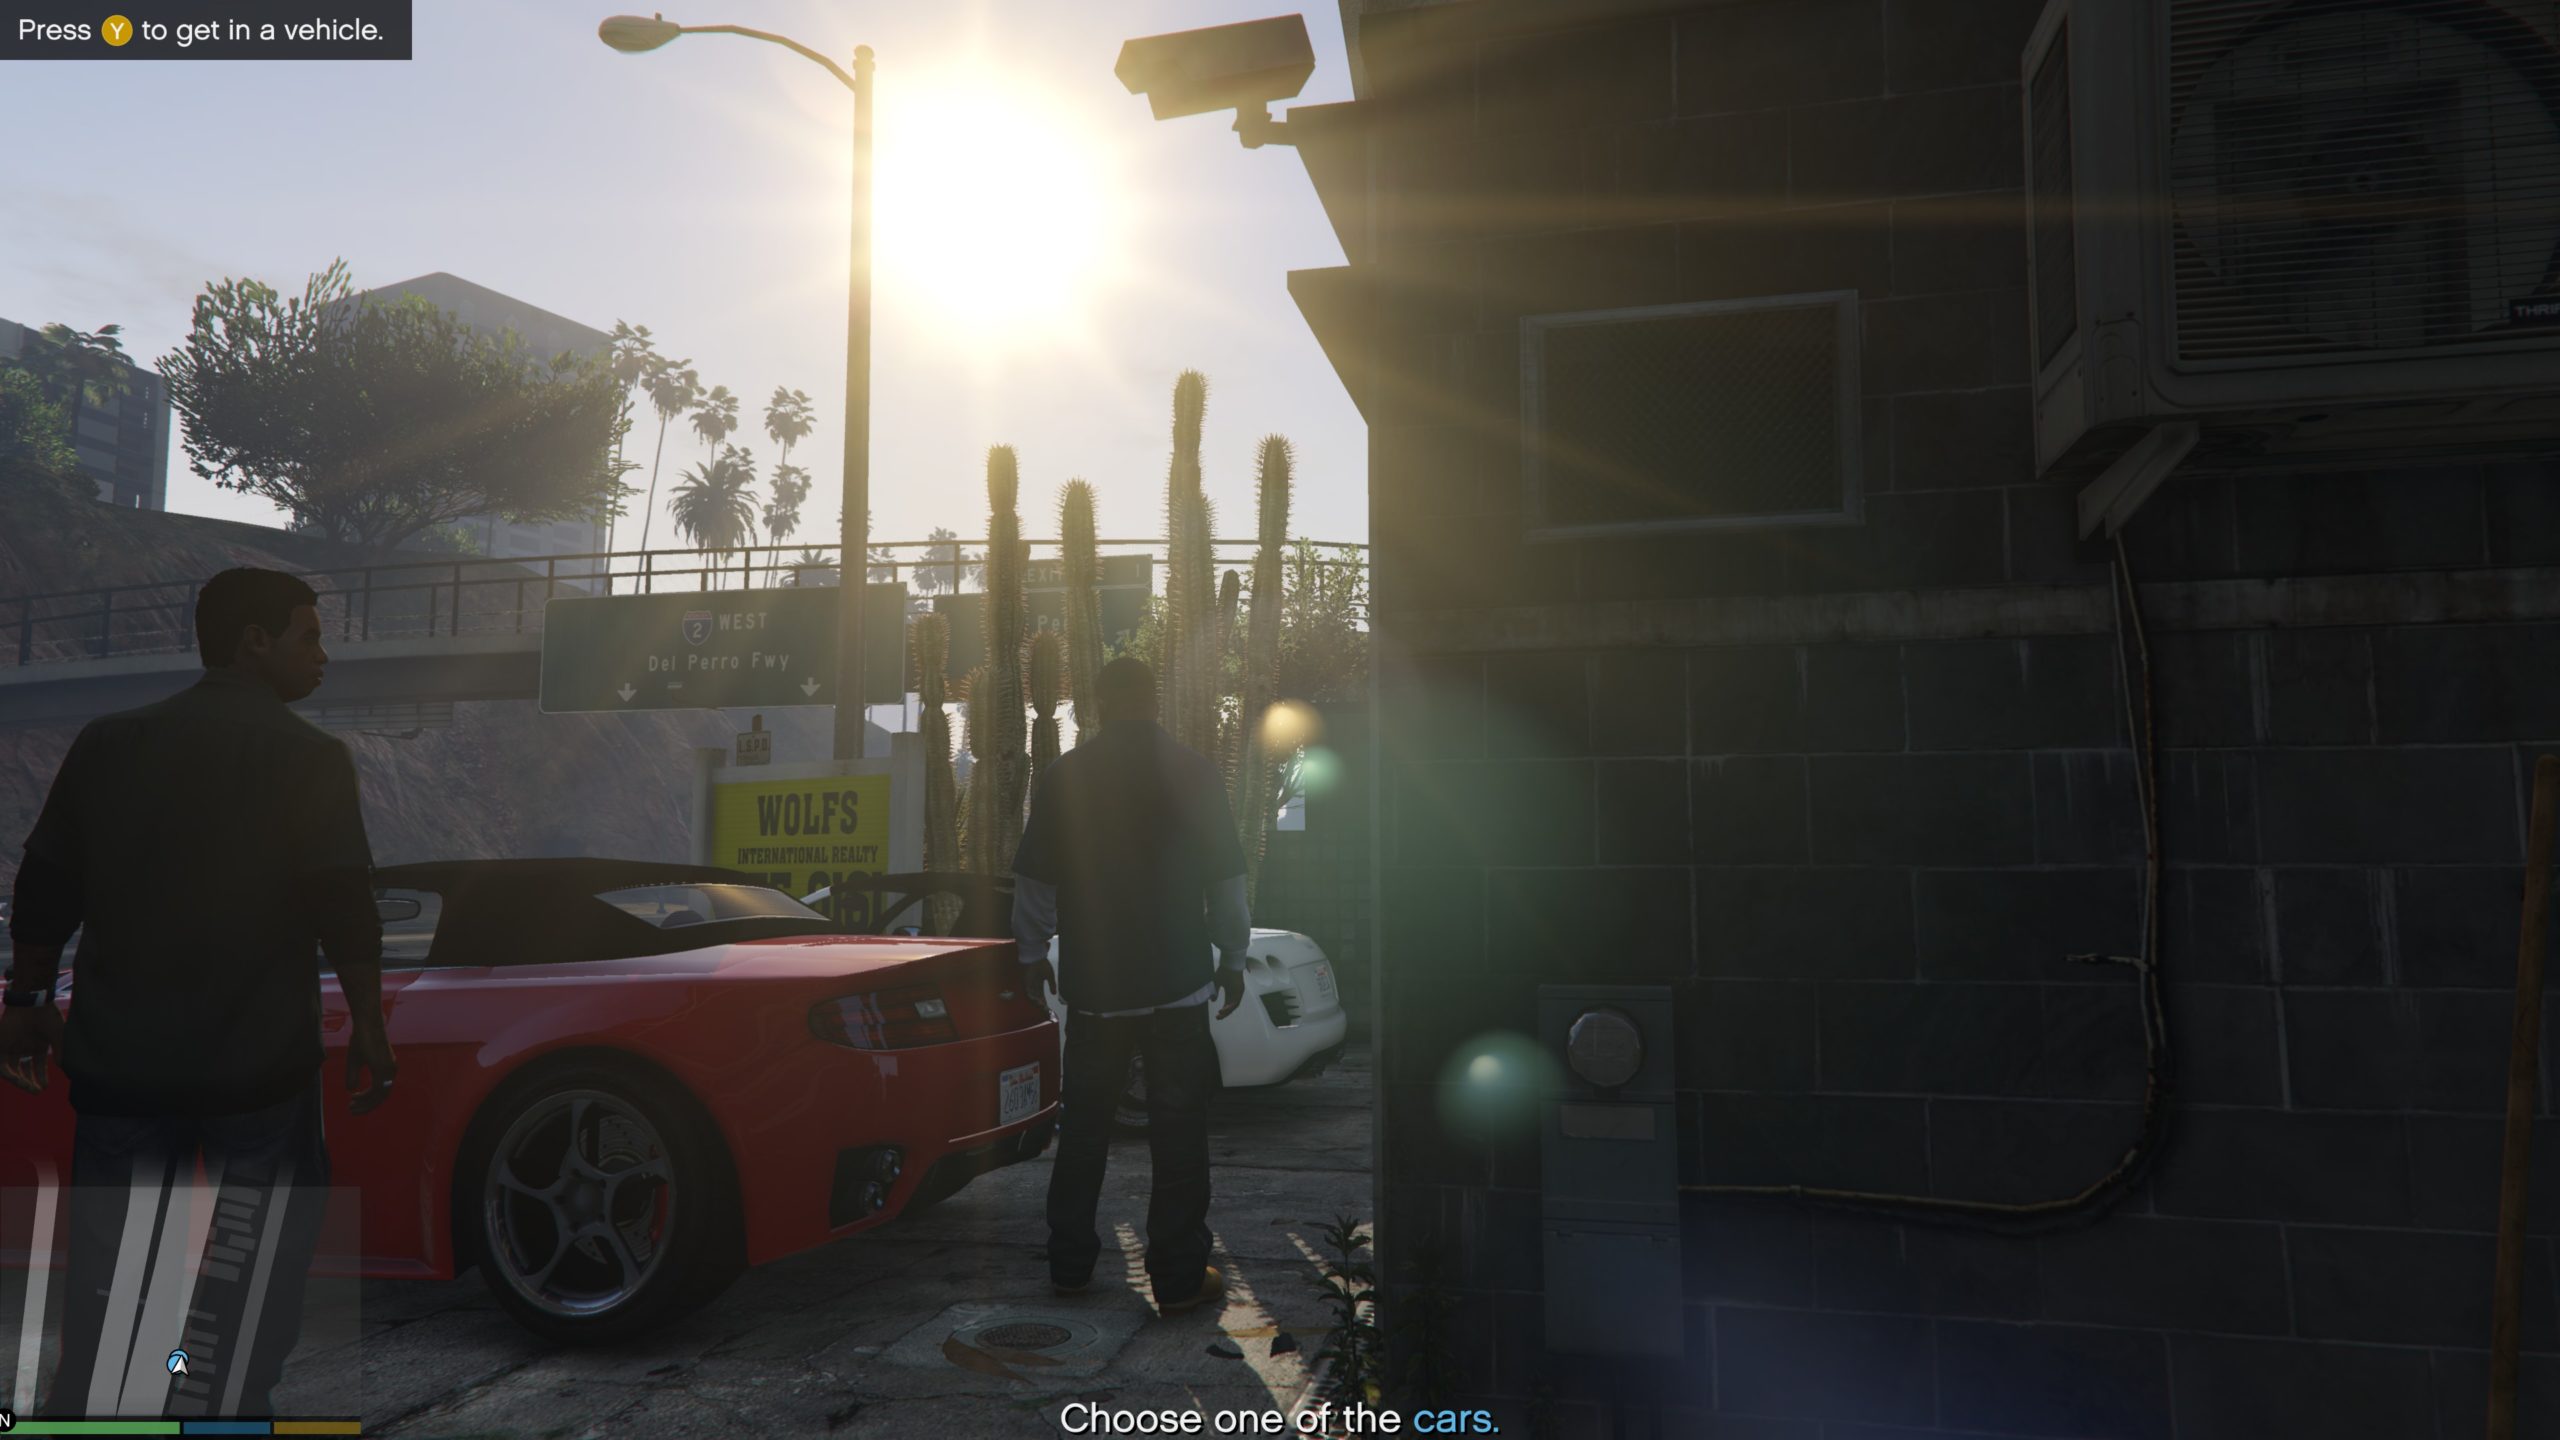 GTA V PC Runs Pretty Well In Ultra HD, If You Have The Hardware